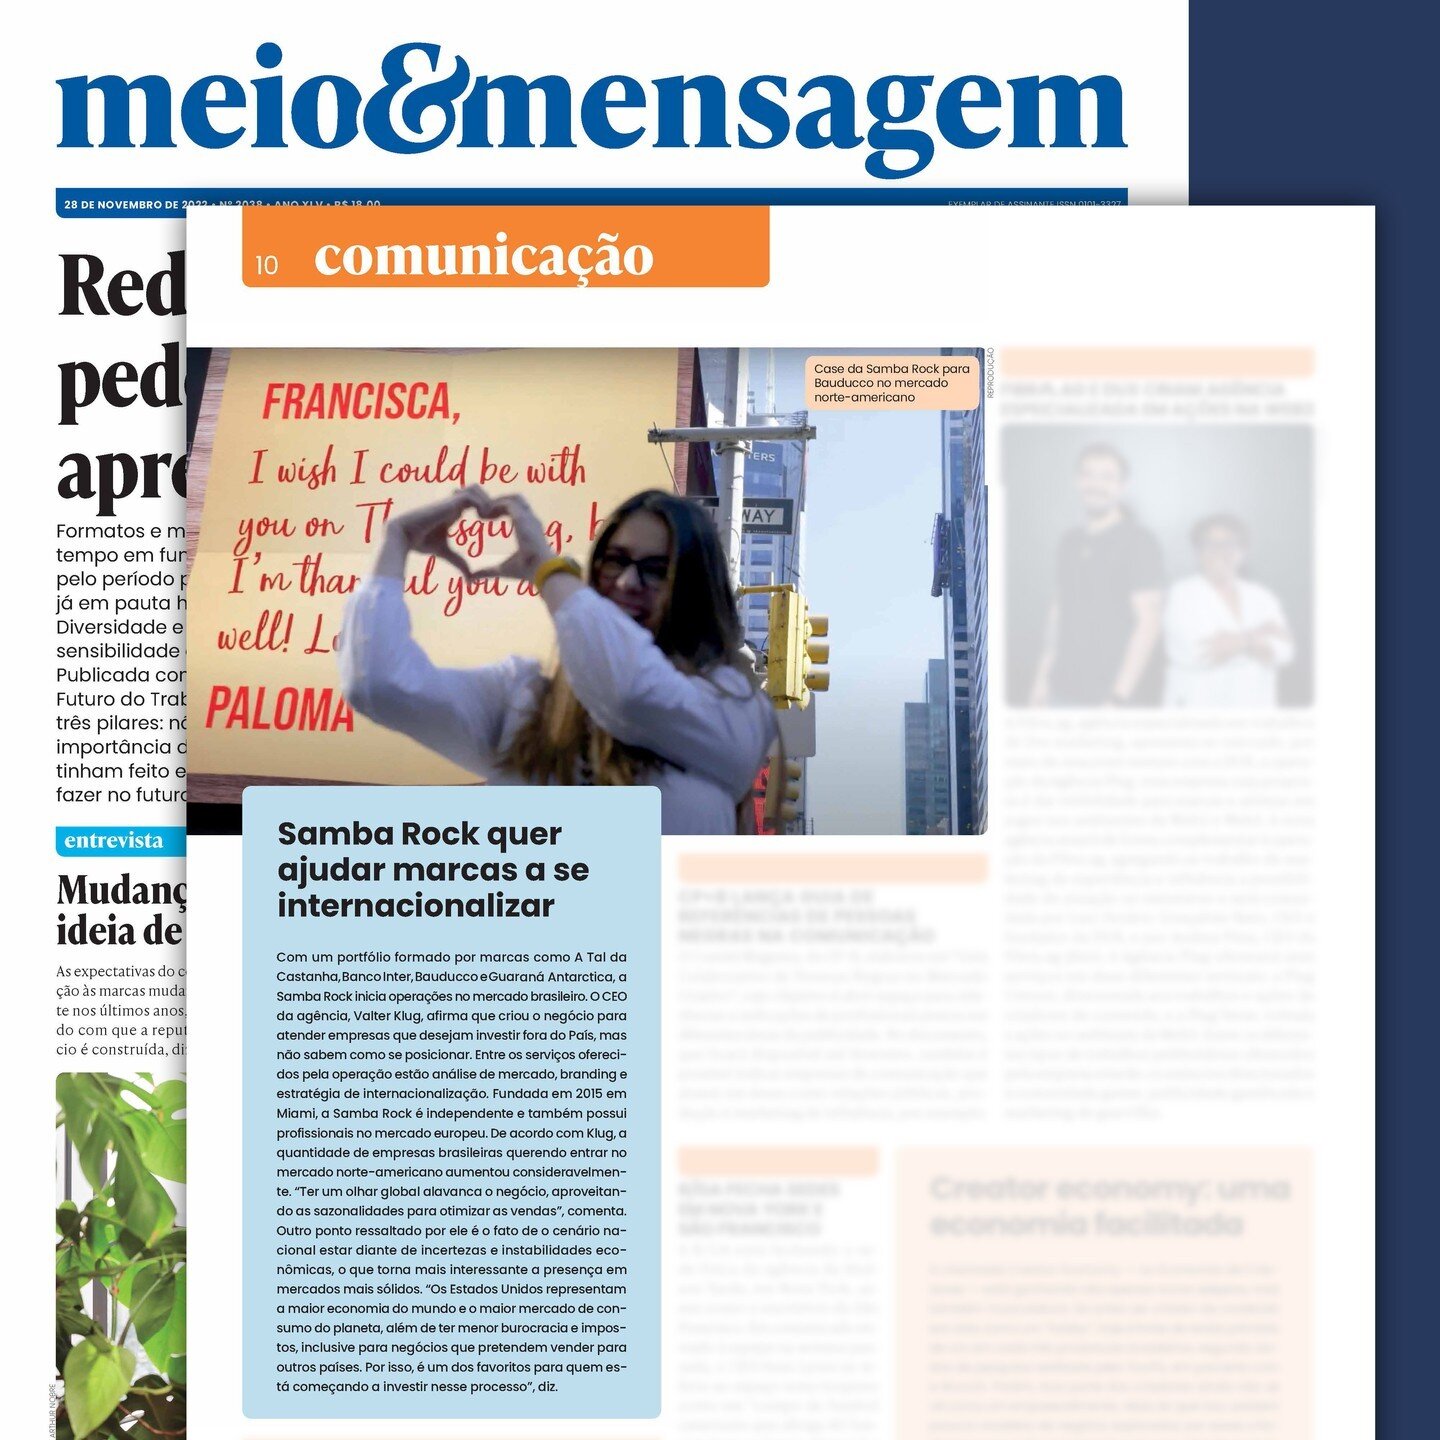 We are excited to announce that we have now arrived in Brazil! This news was featured in an article by Meio &amp; Mensagem, the top newspaper of our trade in that country.

After working with major Brazilian brands such as Bauducco Foods, AB-InBev&rs